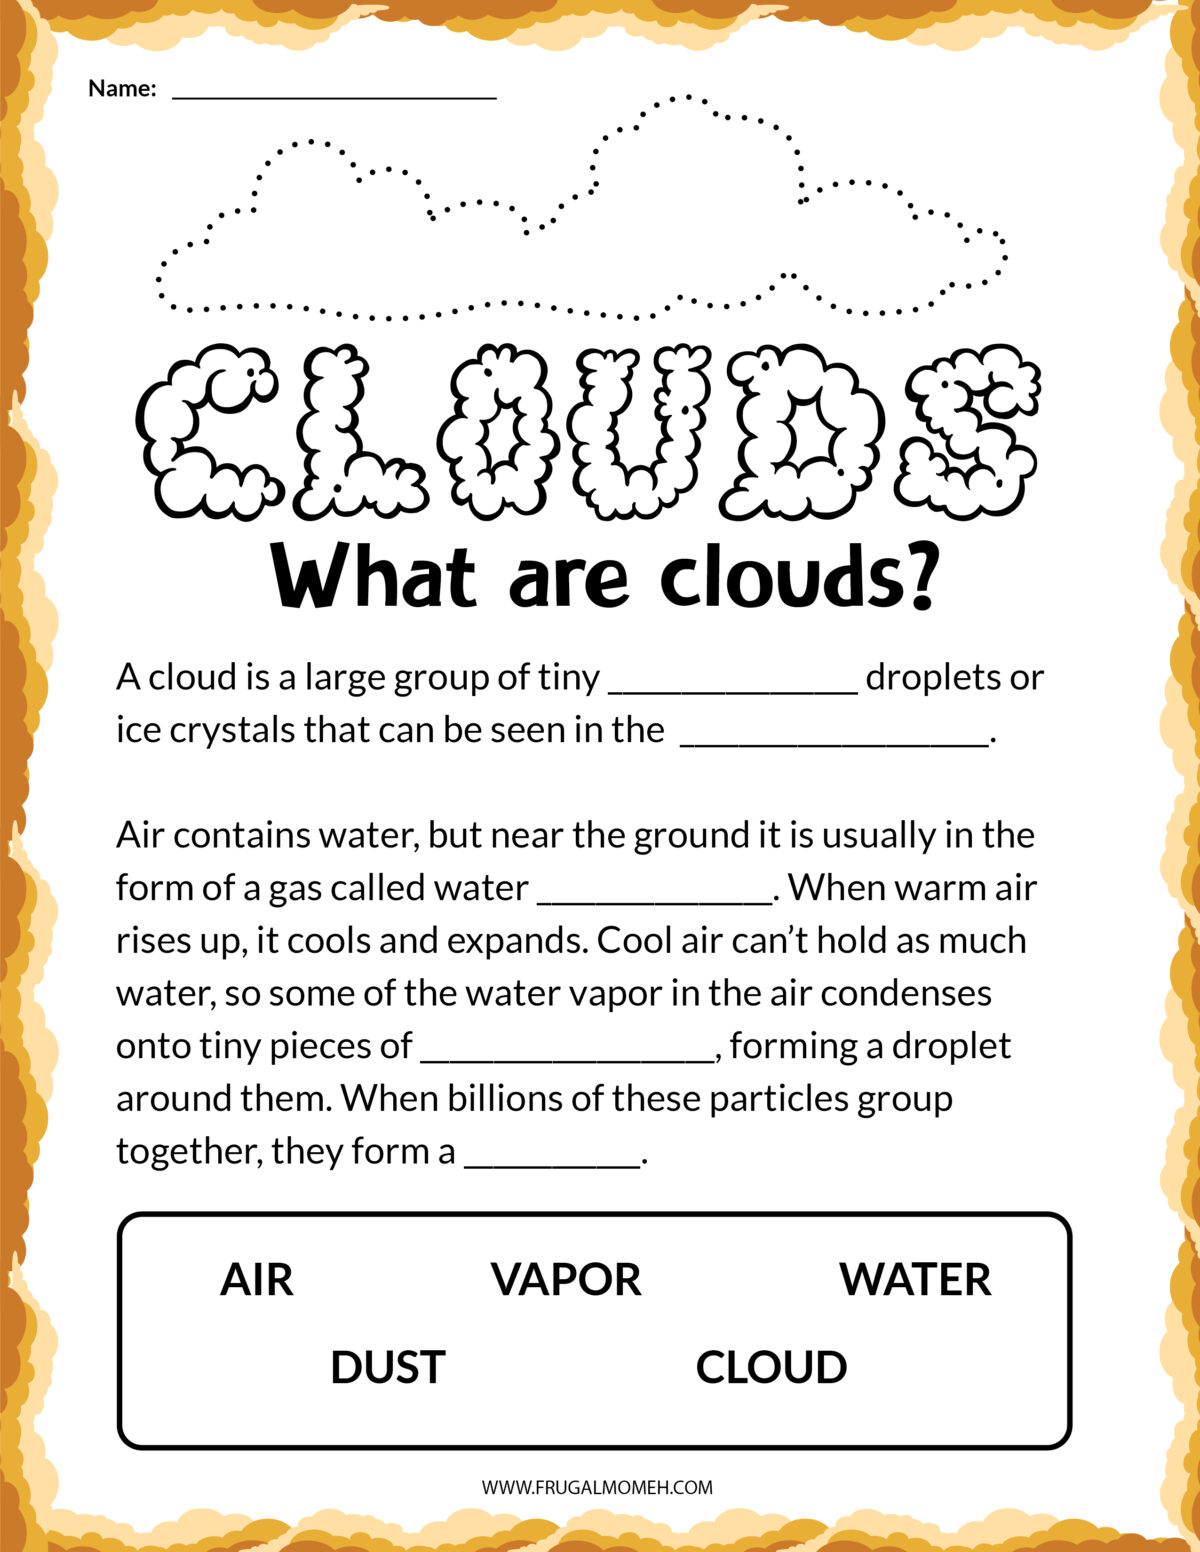 What are clouds? printable sheet.